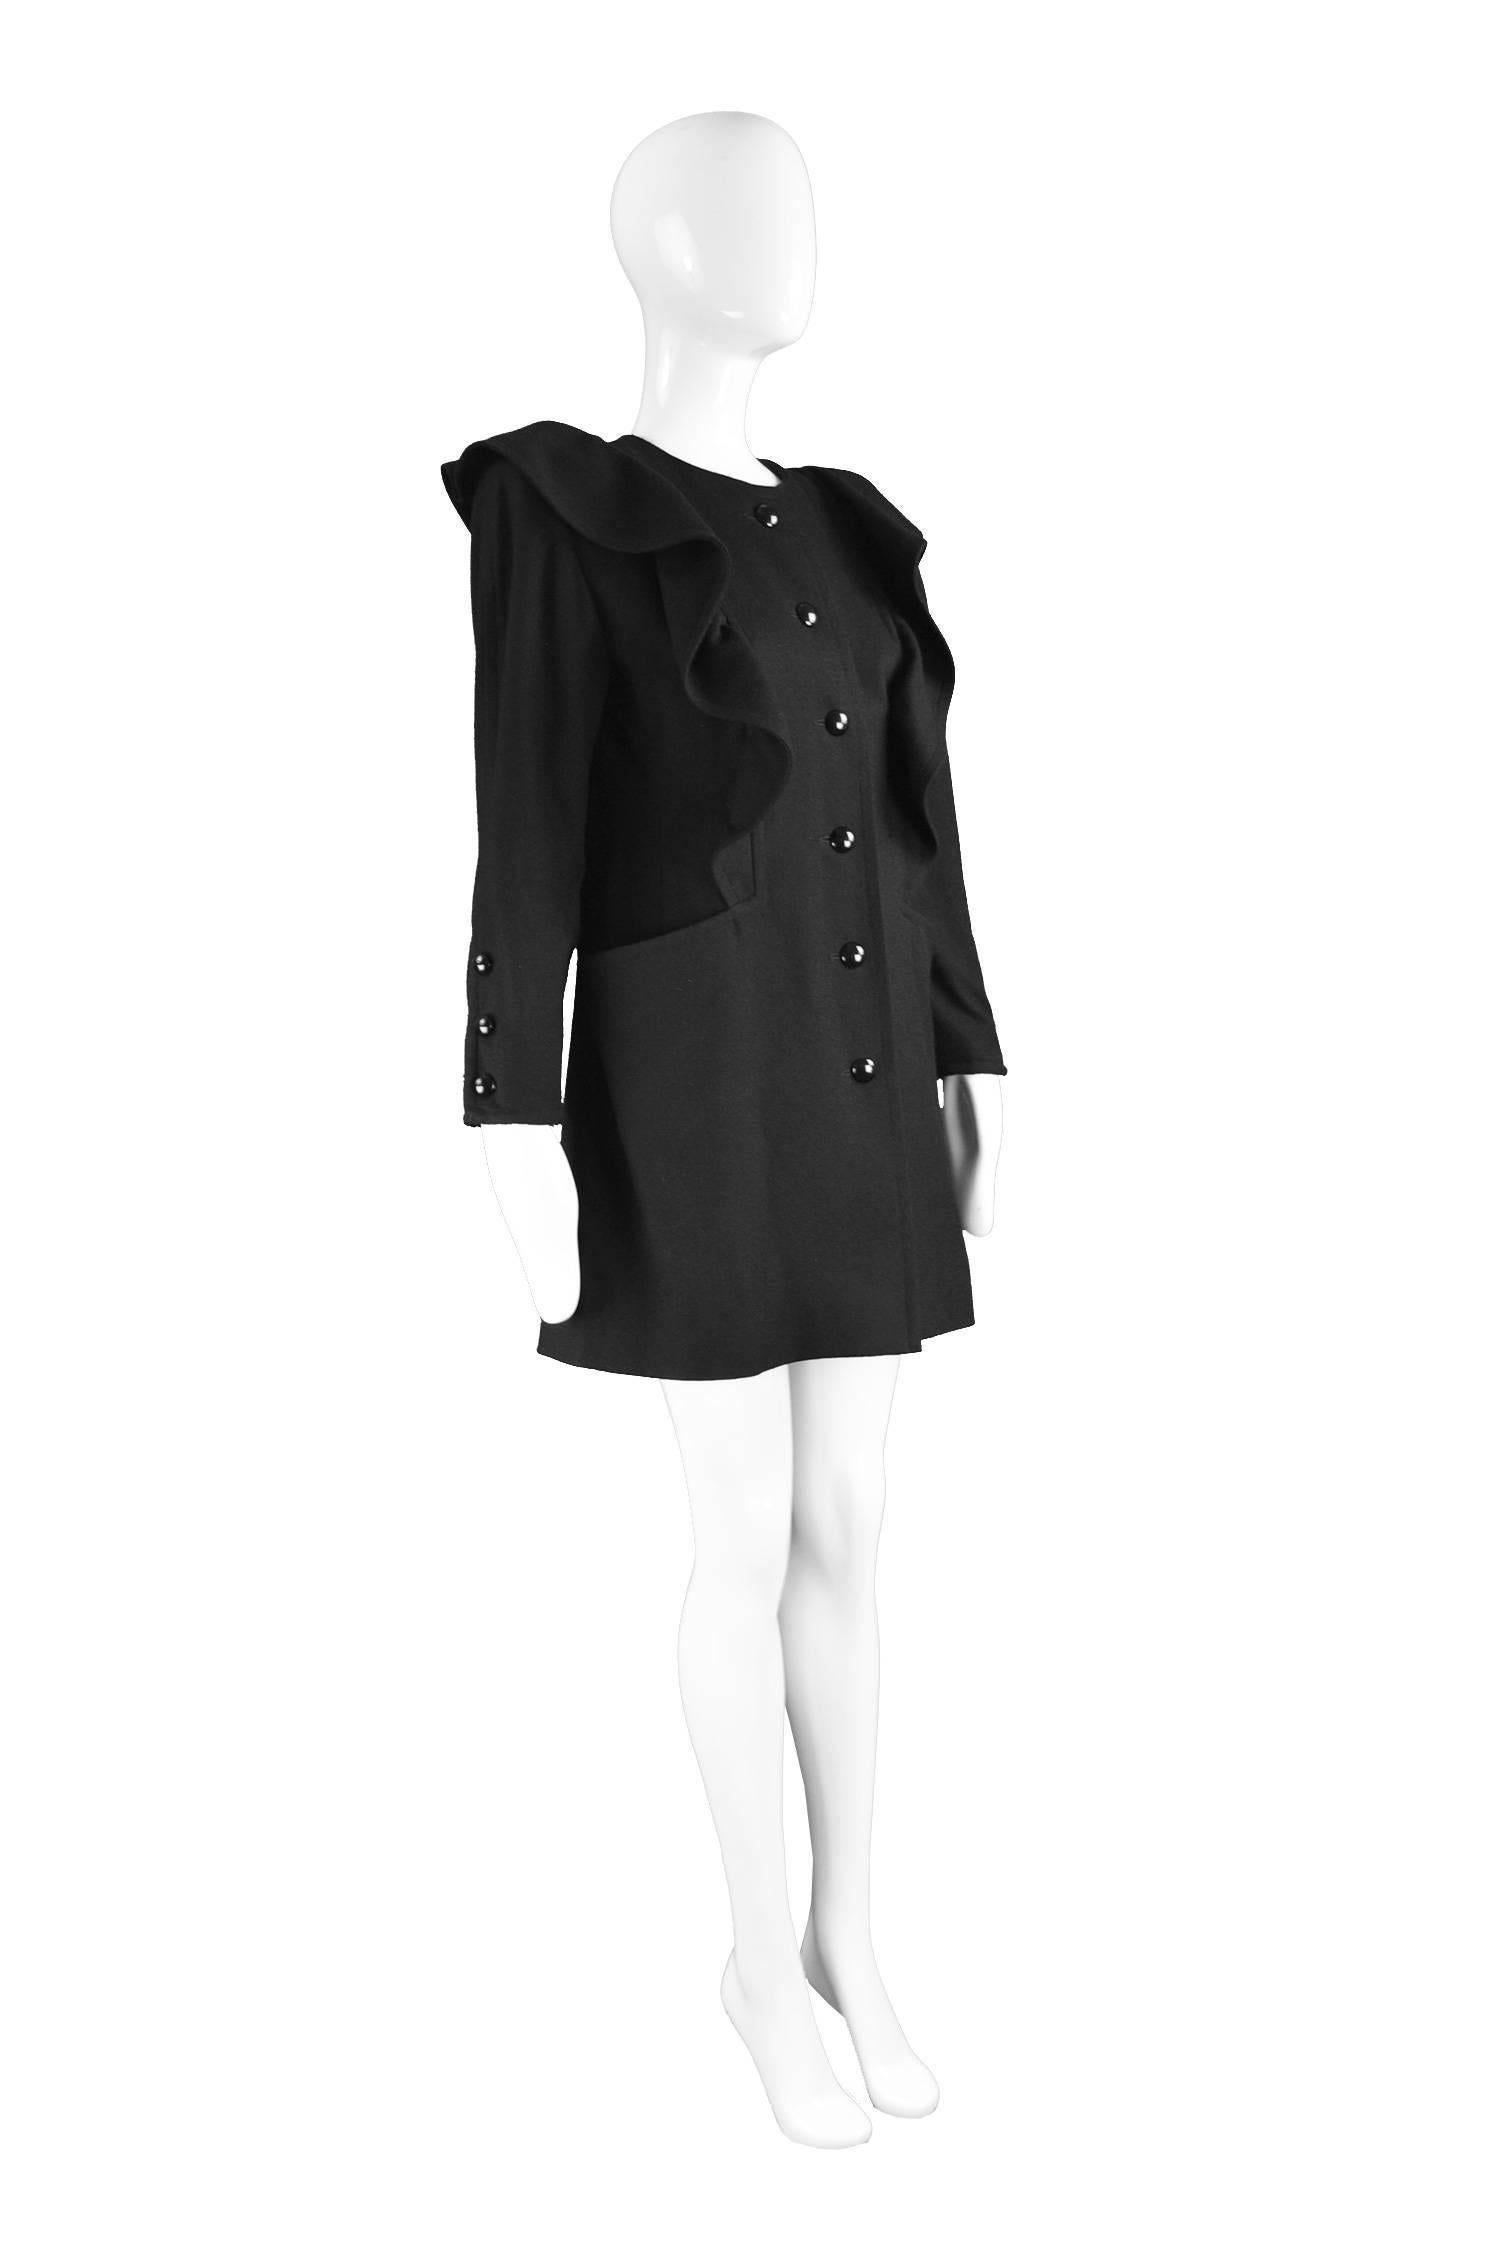 Nina Ricci Vintage Ruffled Detail  Black Wool Coat, 1980s In Excellent Condition For Sale In Doncaster, South Yorkshire